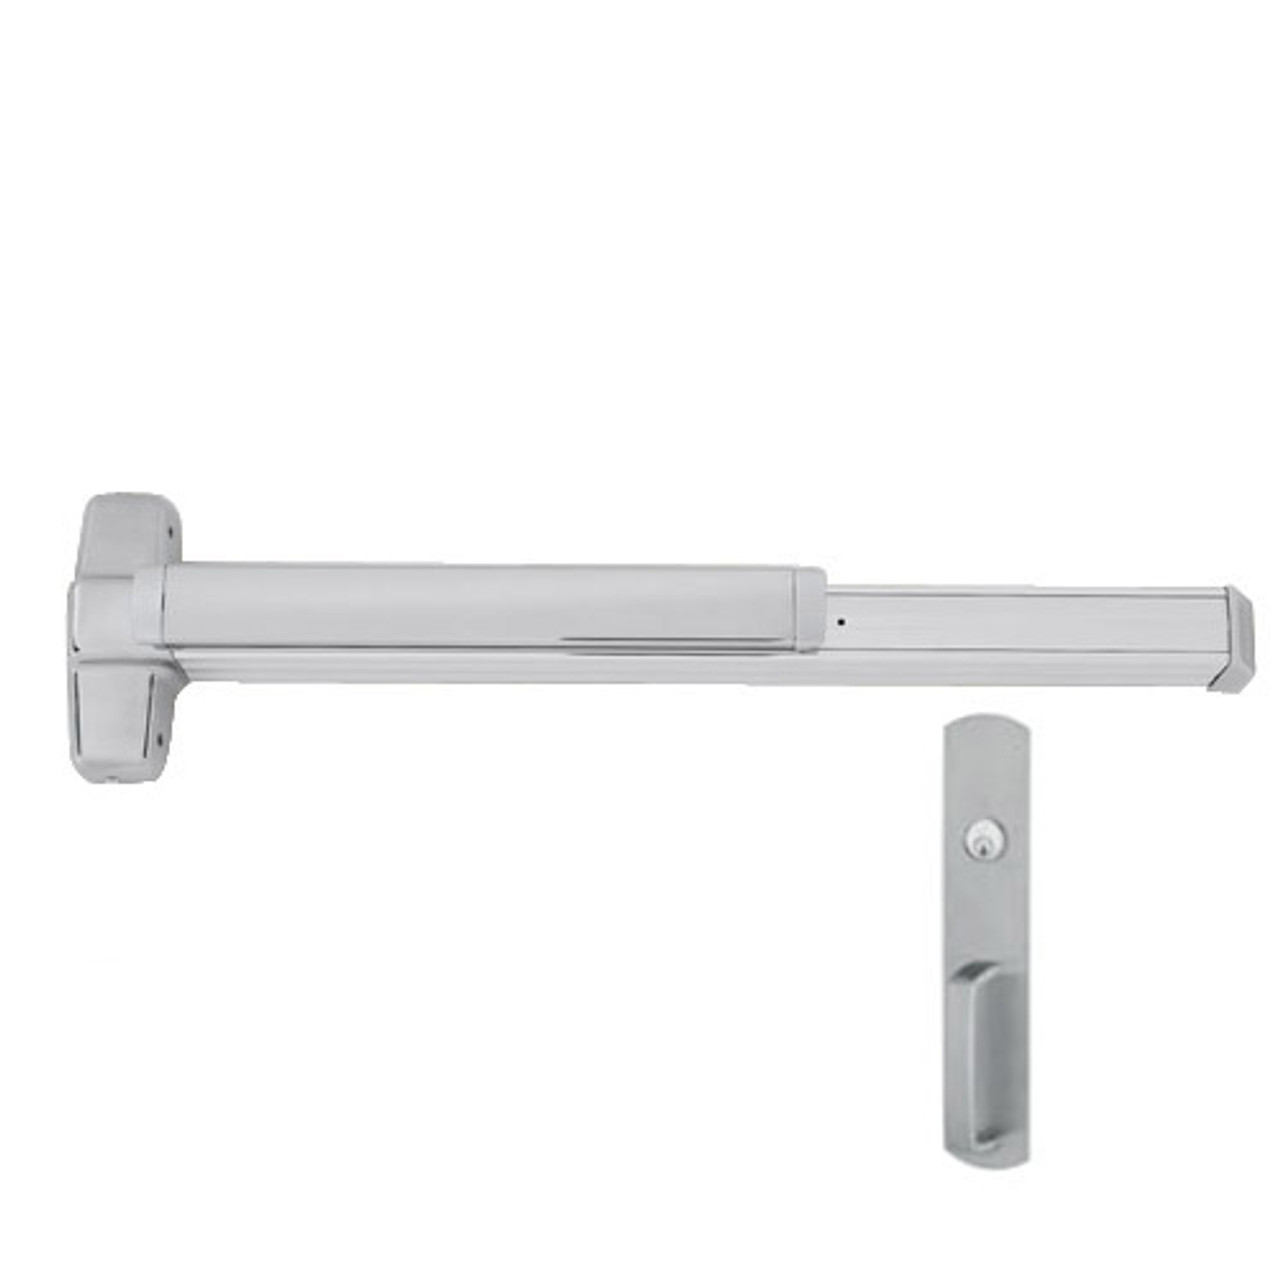 QEL9847NL-US32D-3 Von Duprin Exit Device in Satin Stainless